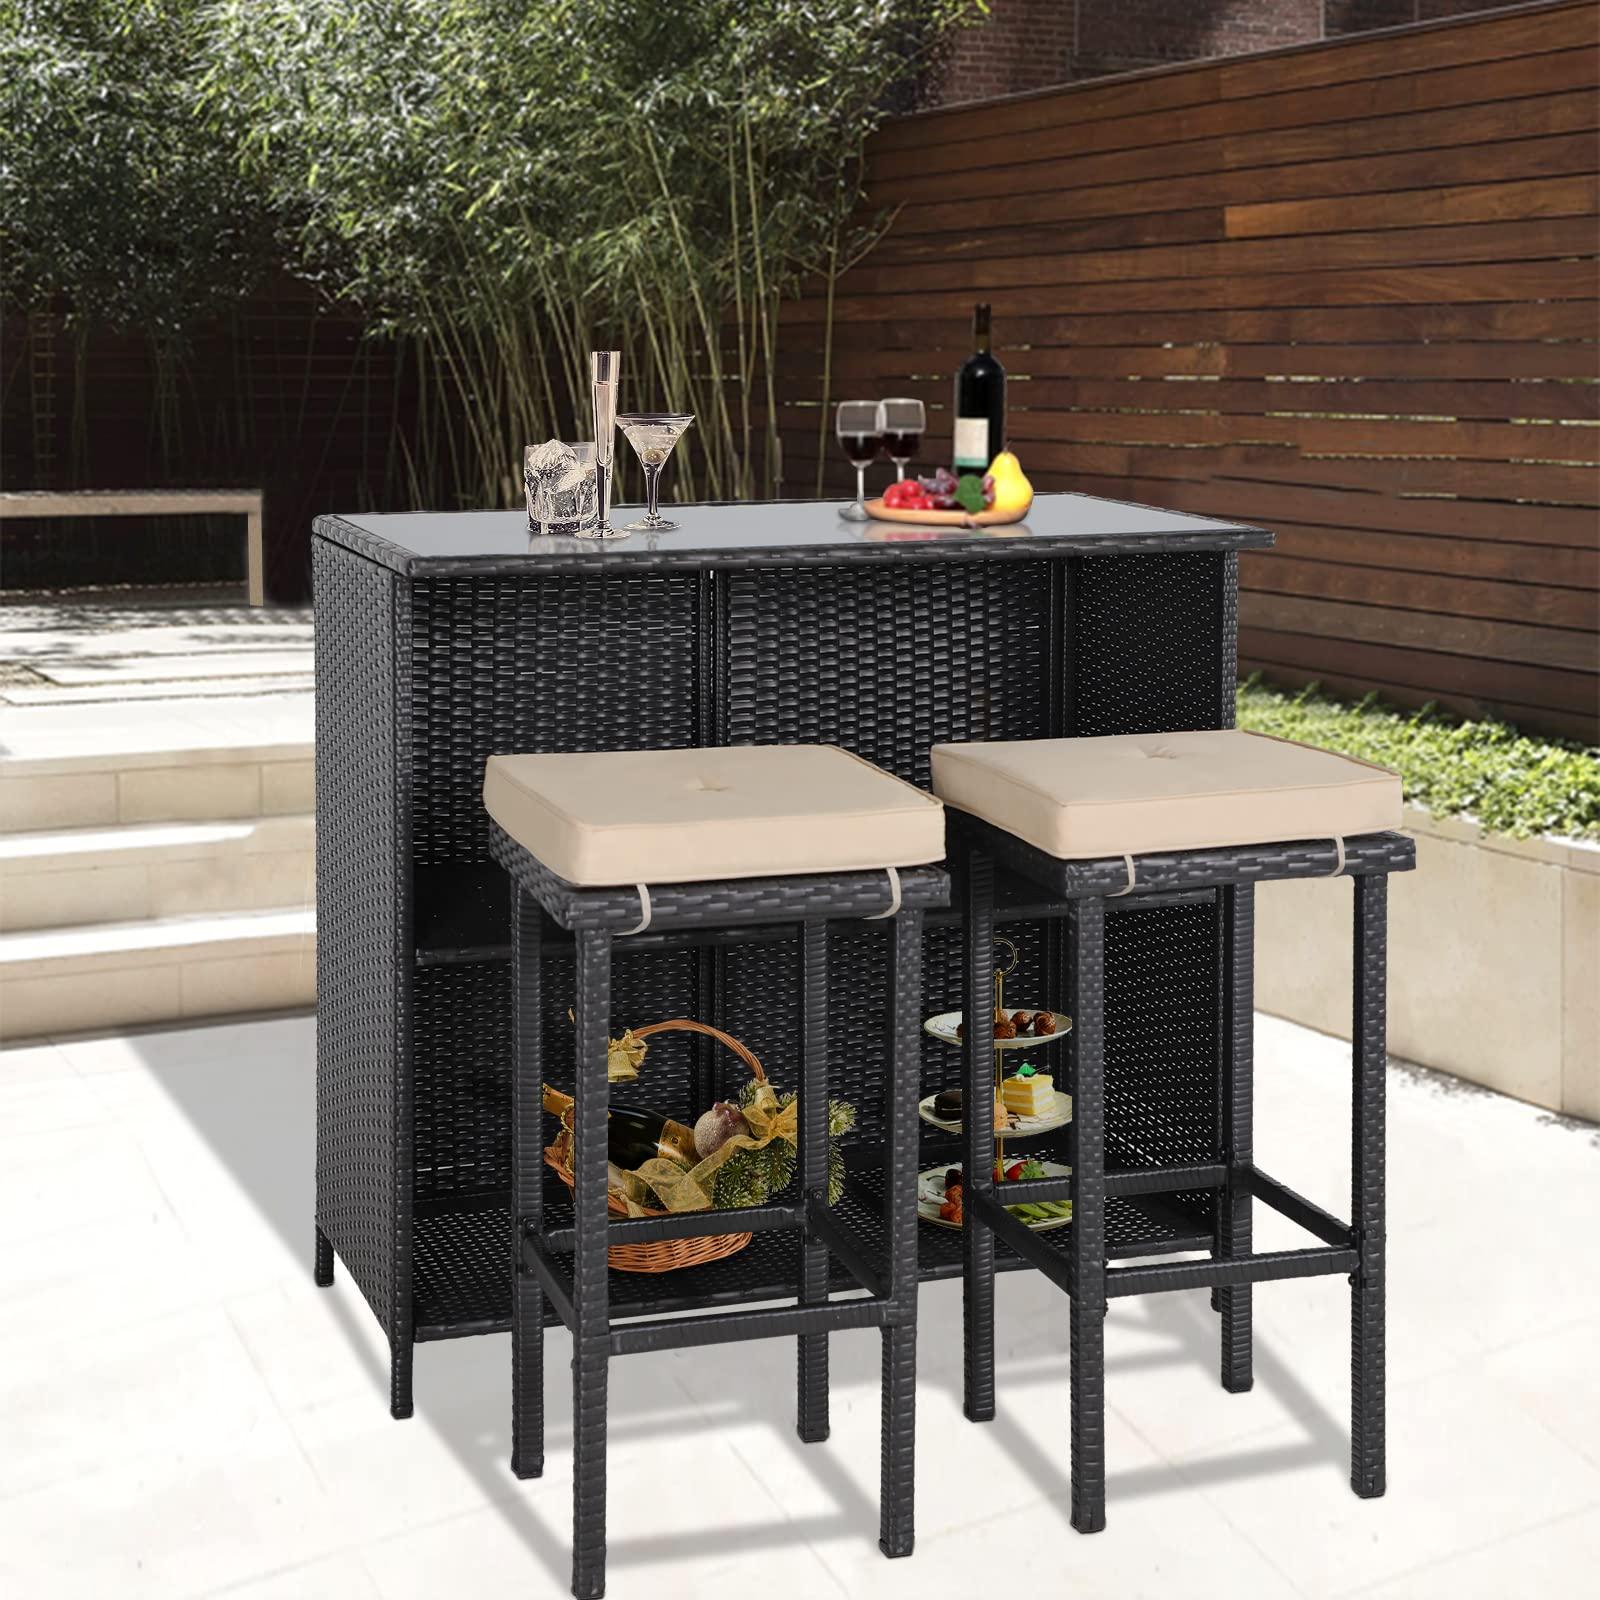 Crownland 3-Piece Wicker Patio Outdoor Bar Set, 2 Stools and 1 Glass Top Table, Bistro Set, Brown Furniture for Deck, Lawn, Backyard - CookCave